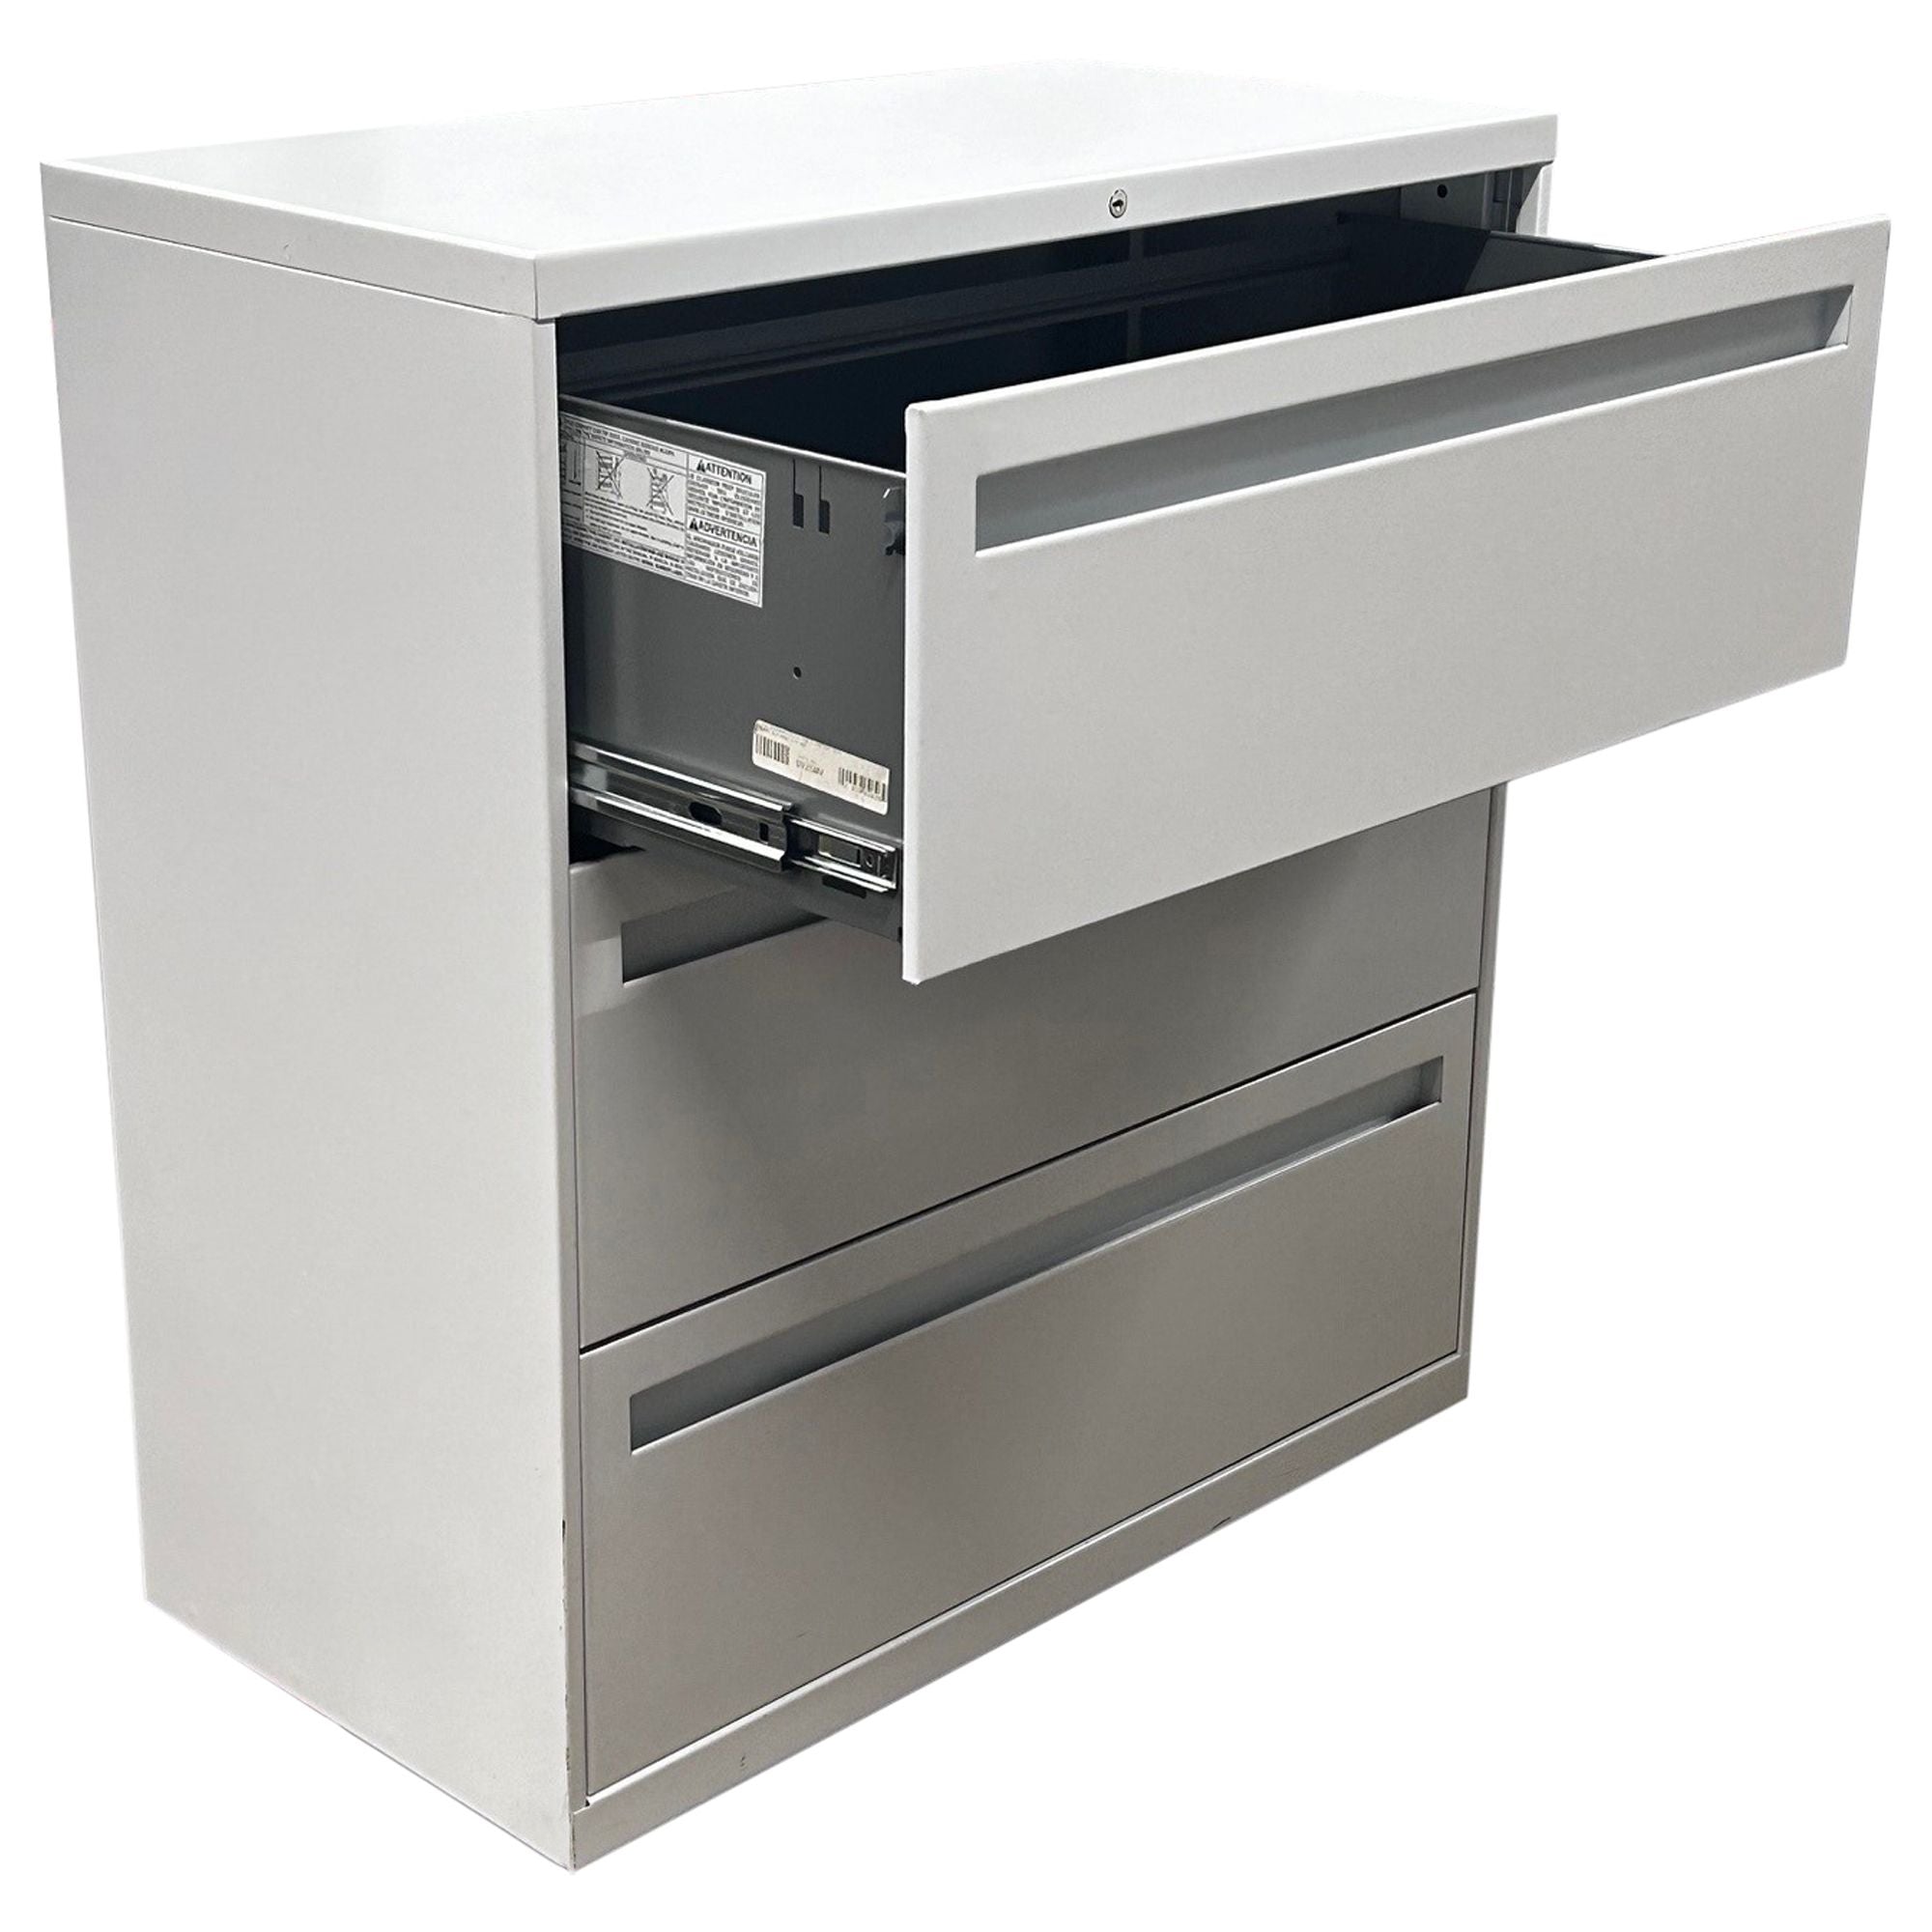 Allsteel Essentials 3 Drawer Lateral File, White - Preowned